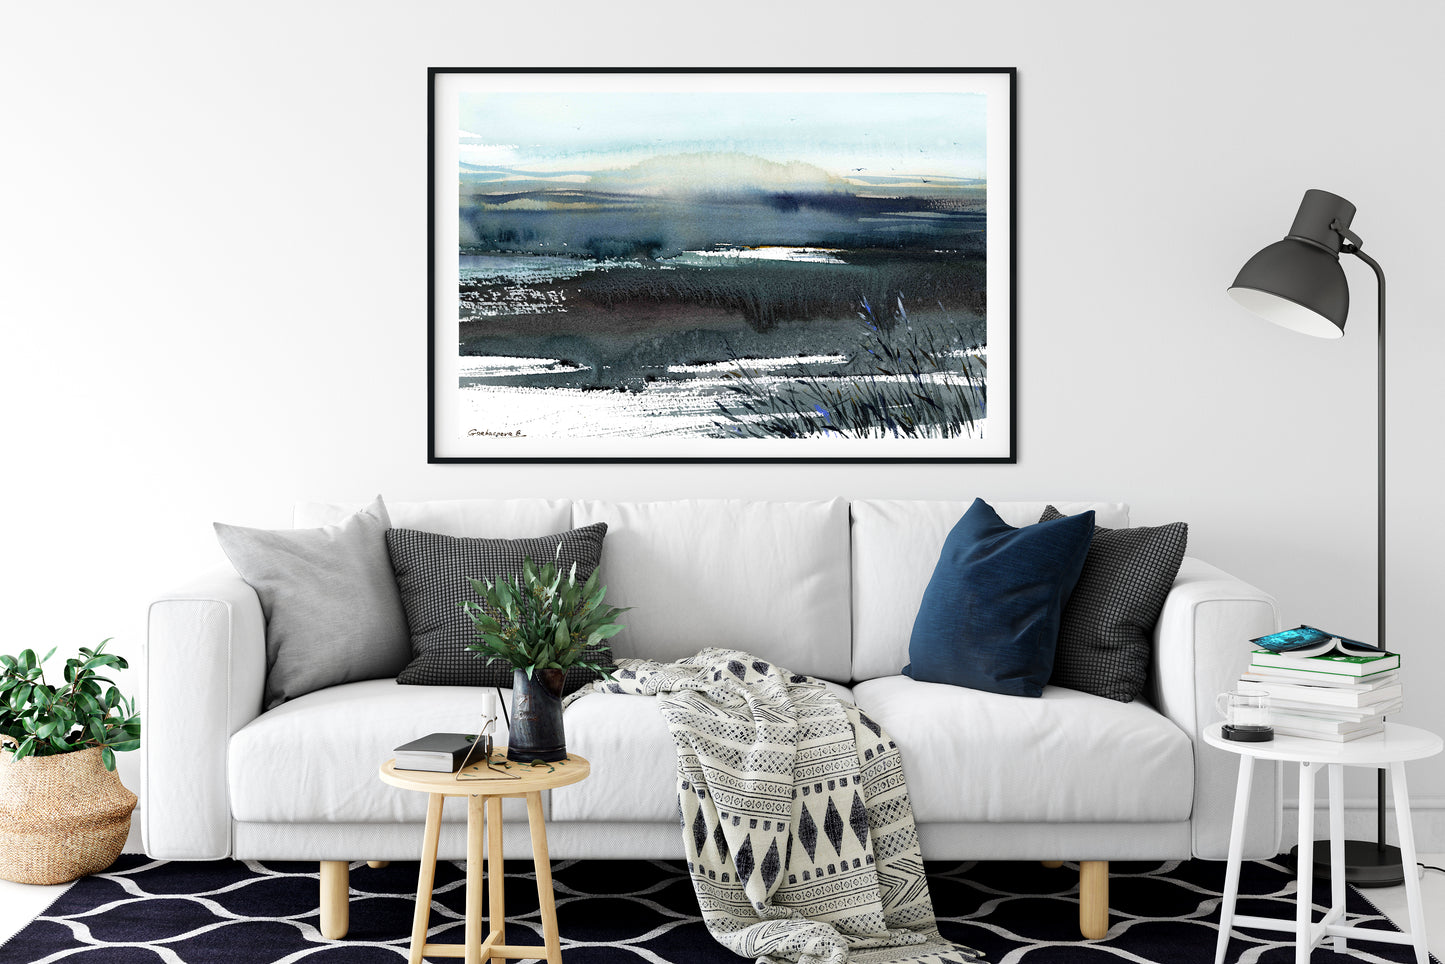 Abstract Wall Art, Modern Landscape Painting, Contemporary Watercolor, Extra Large Canvas Print, Navy Blue, Gray